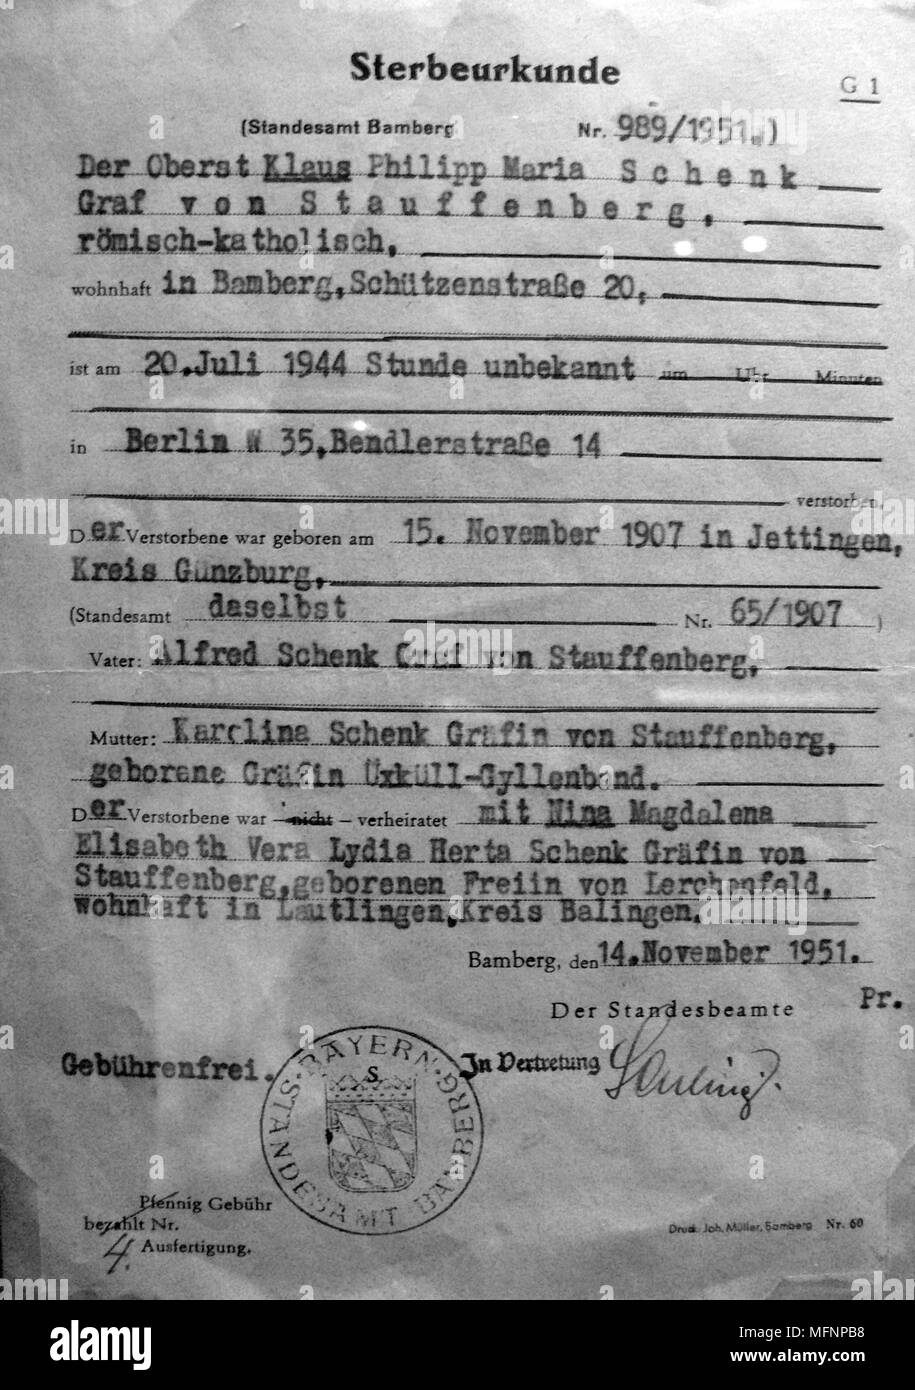 Death certificate of Claus Schenk Graf von Stauffenberg (1905-1944), issued by the city of Bamberg in 1951.  Von Stuaffenberg, German aristocrat and military officer, carried and placed the bomb used in the failed attempt to assassinate Hitler at Wolfsschanze on 20 July 1944.  He was shot on the night of 20-21 July 1944. Stock Photo